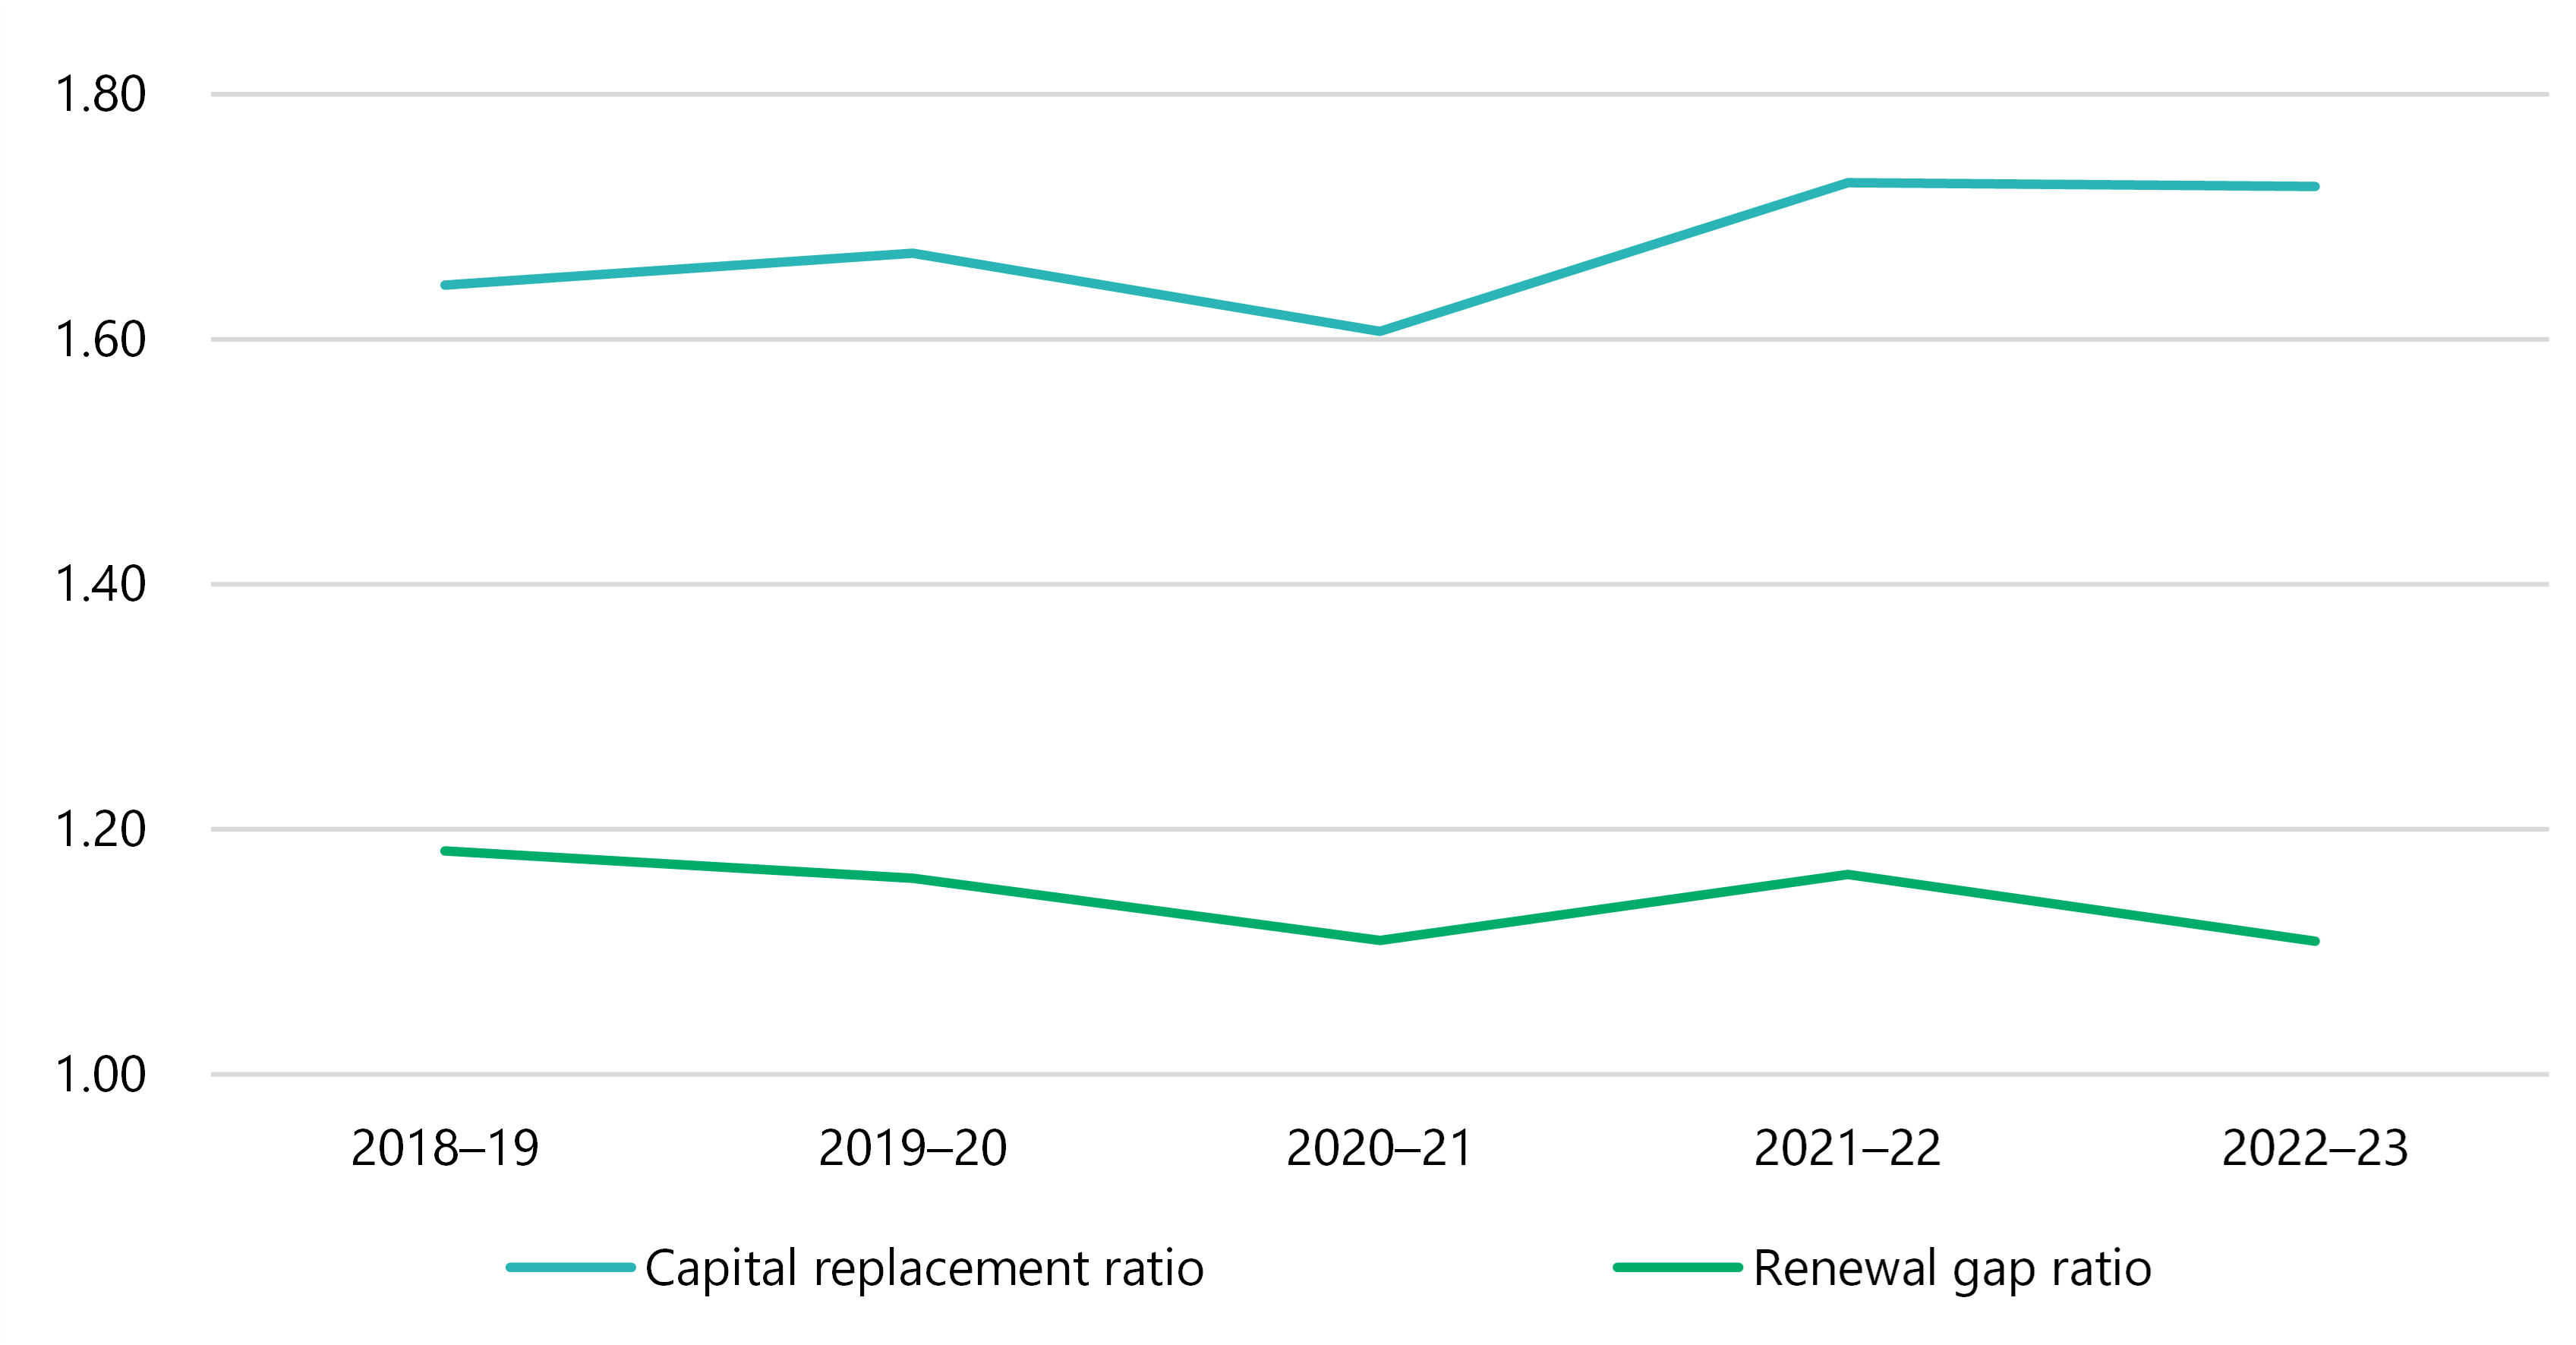 Figure 20 is a stacked line graph showing that the sector's average capital replacement ratio was about 1.64 in 2018–19, 1.67 in 2019–20, 1.61 in 2020–21, 1.73 in 2021–22 and 1.72 in 2022–23. The renewal gap ratio was about 1.18 in 2018–19, 1.16 in 2019–20, 1.11 in 202–21, 1.16 in 2021–22 and 1.12 in 2022–23.